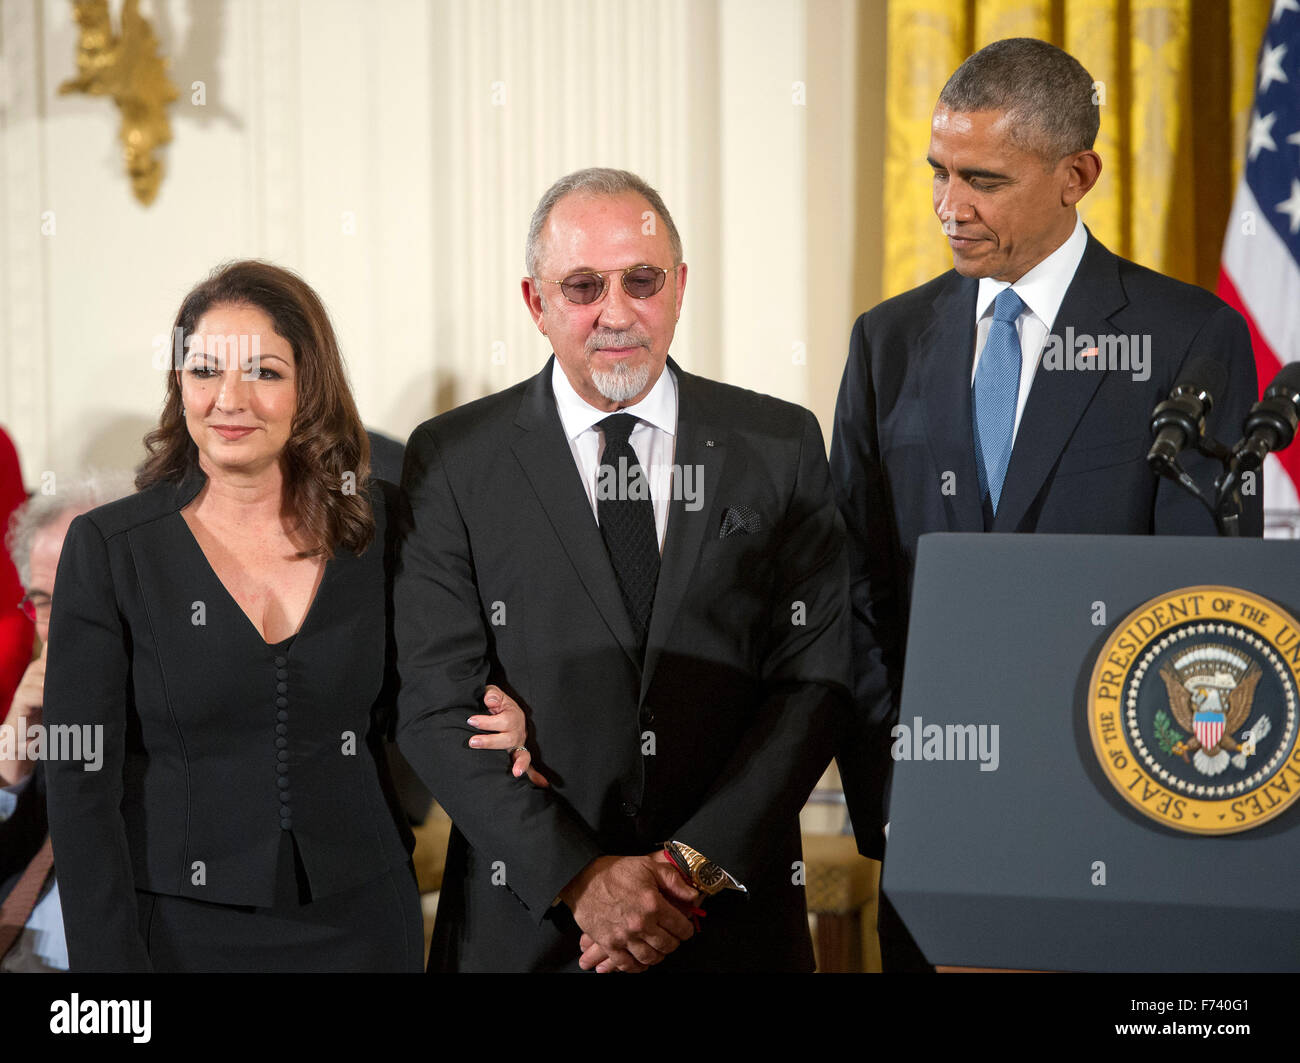 Gloria and Emilio Estefan (C) stand to receive the Presidential Medal of Freedom from United States President Barack Obama during a ceremony in the East Room of the White House in Washington, DC on Tuesday, November 24, 2015. The Medal is the highest US civilian honor, presented to individuals who have made especially meritorious contributions to the security or national interests of the US, to world peace, or to cultural or significant public or private endeavors. Photo: Ron Sachs/CNP/dpa - NO WIRE SERVICE - Stock Photo